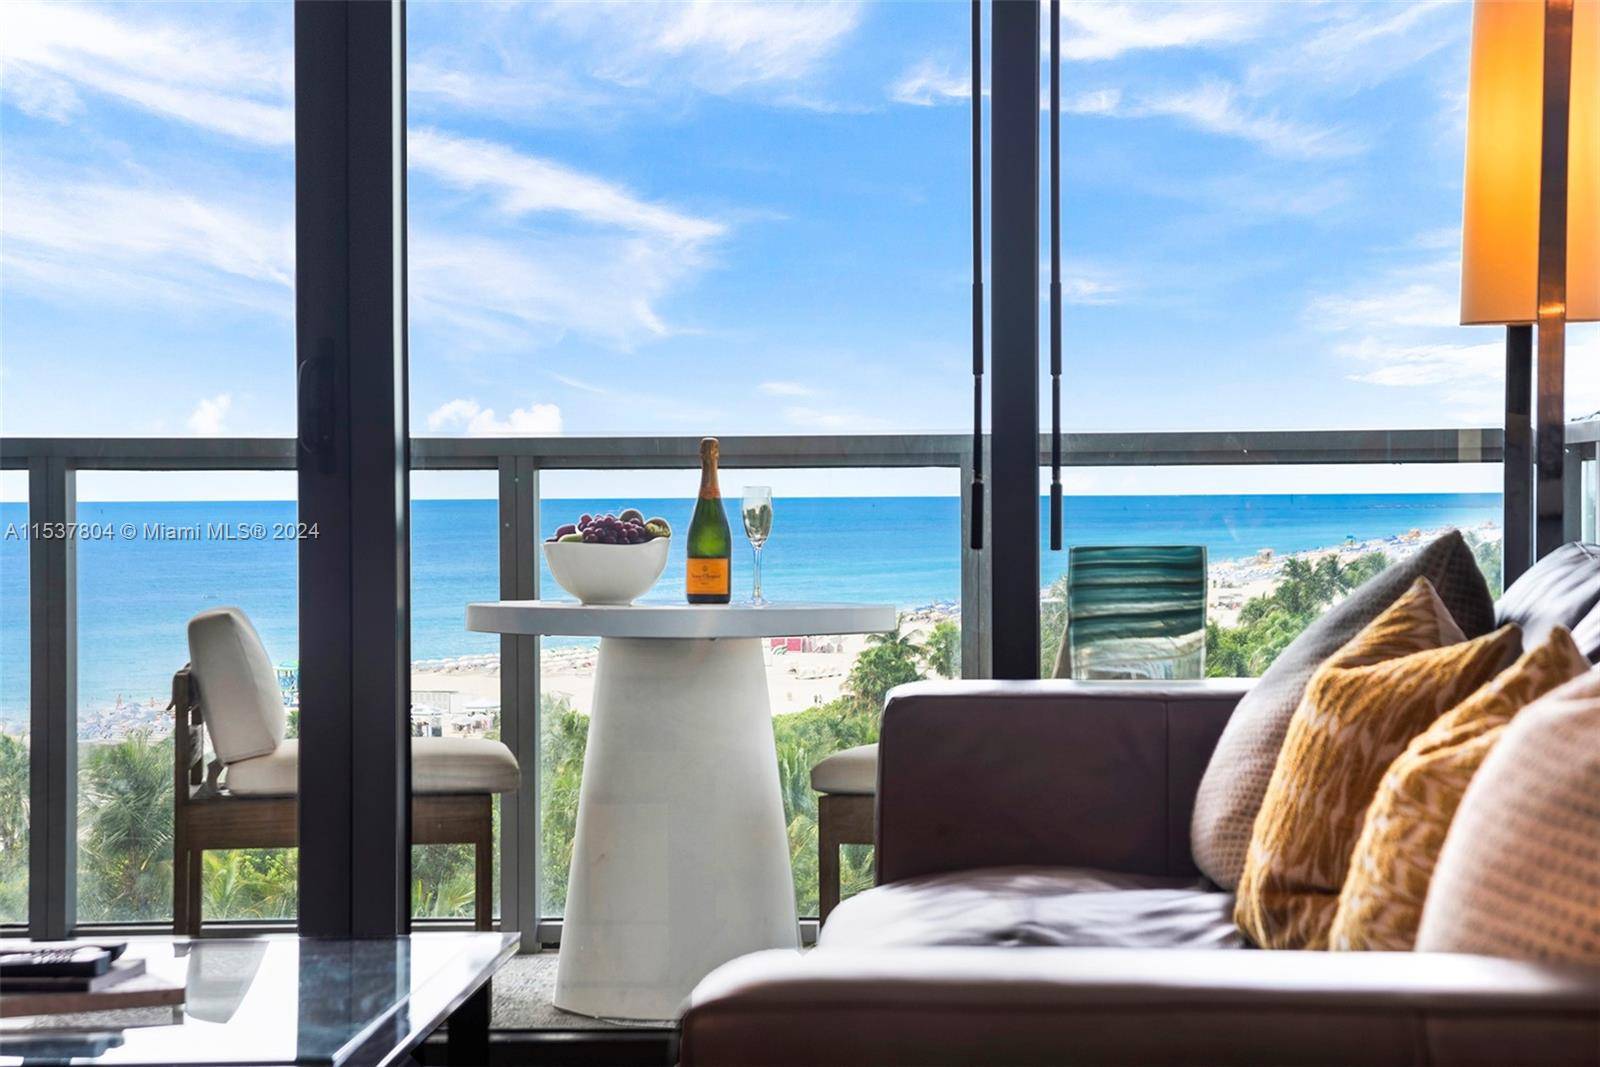 This private residence at the W Hotel South Beach allows you to enjoy a waterfront vacation with either friends or family just footsteps away from the beautiful white sand of ...